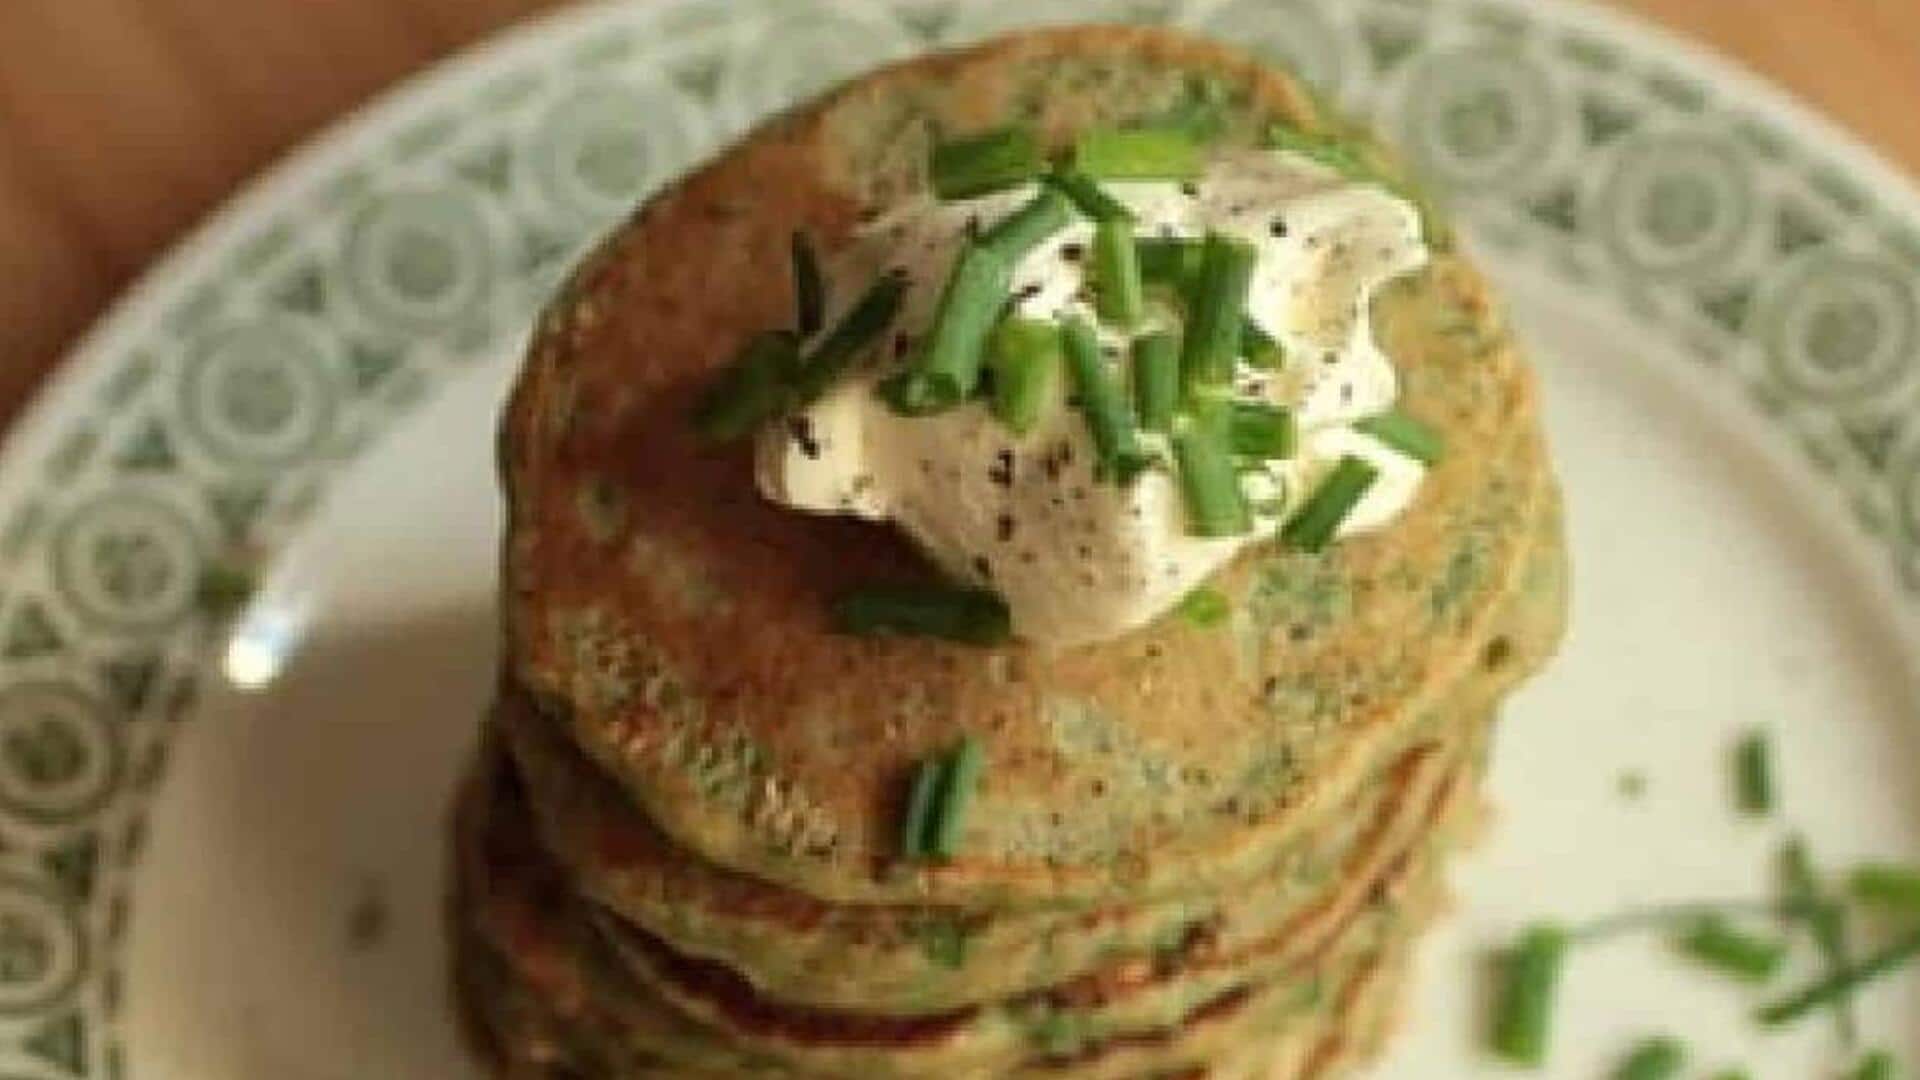 Your guests will love this Swiss chard pancake recipe